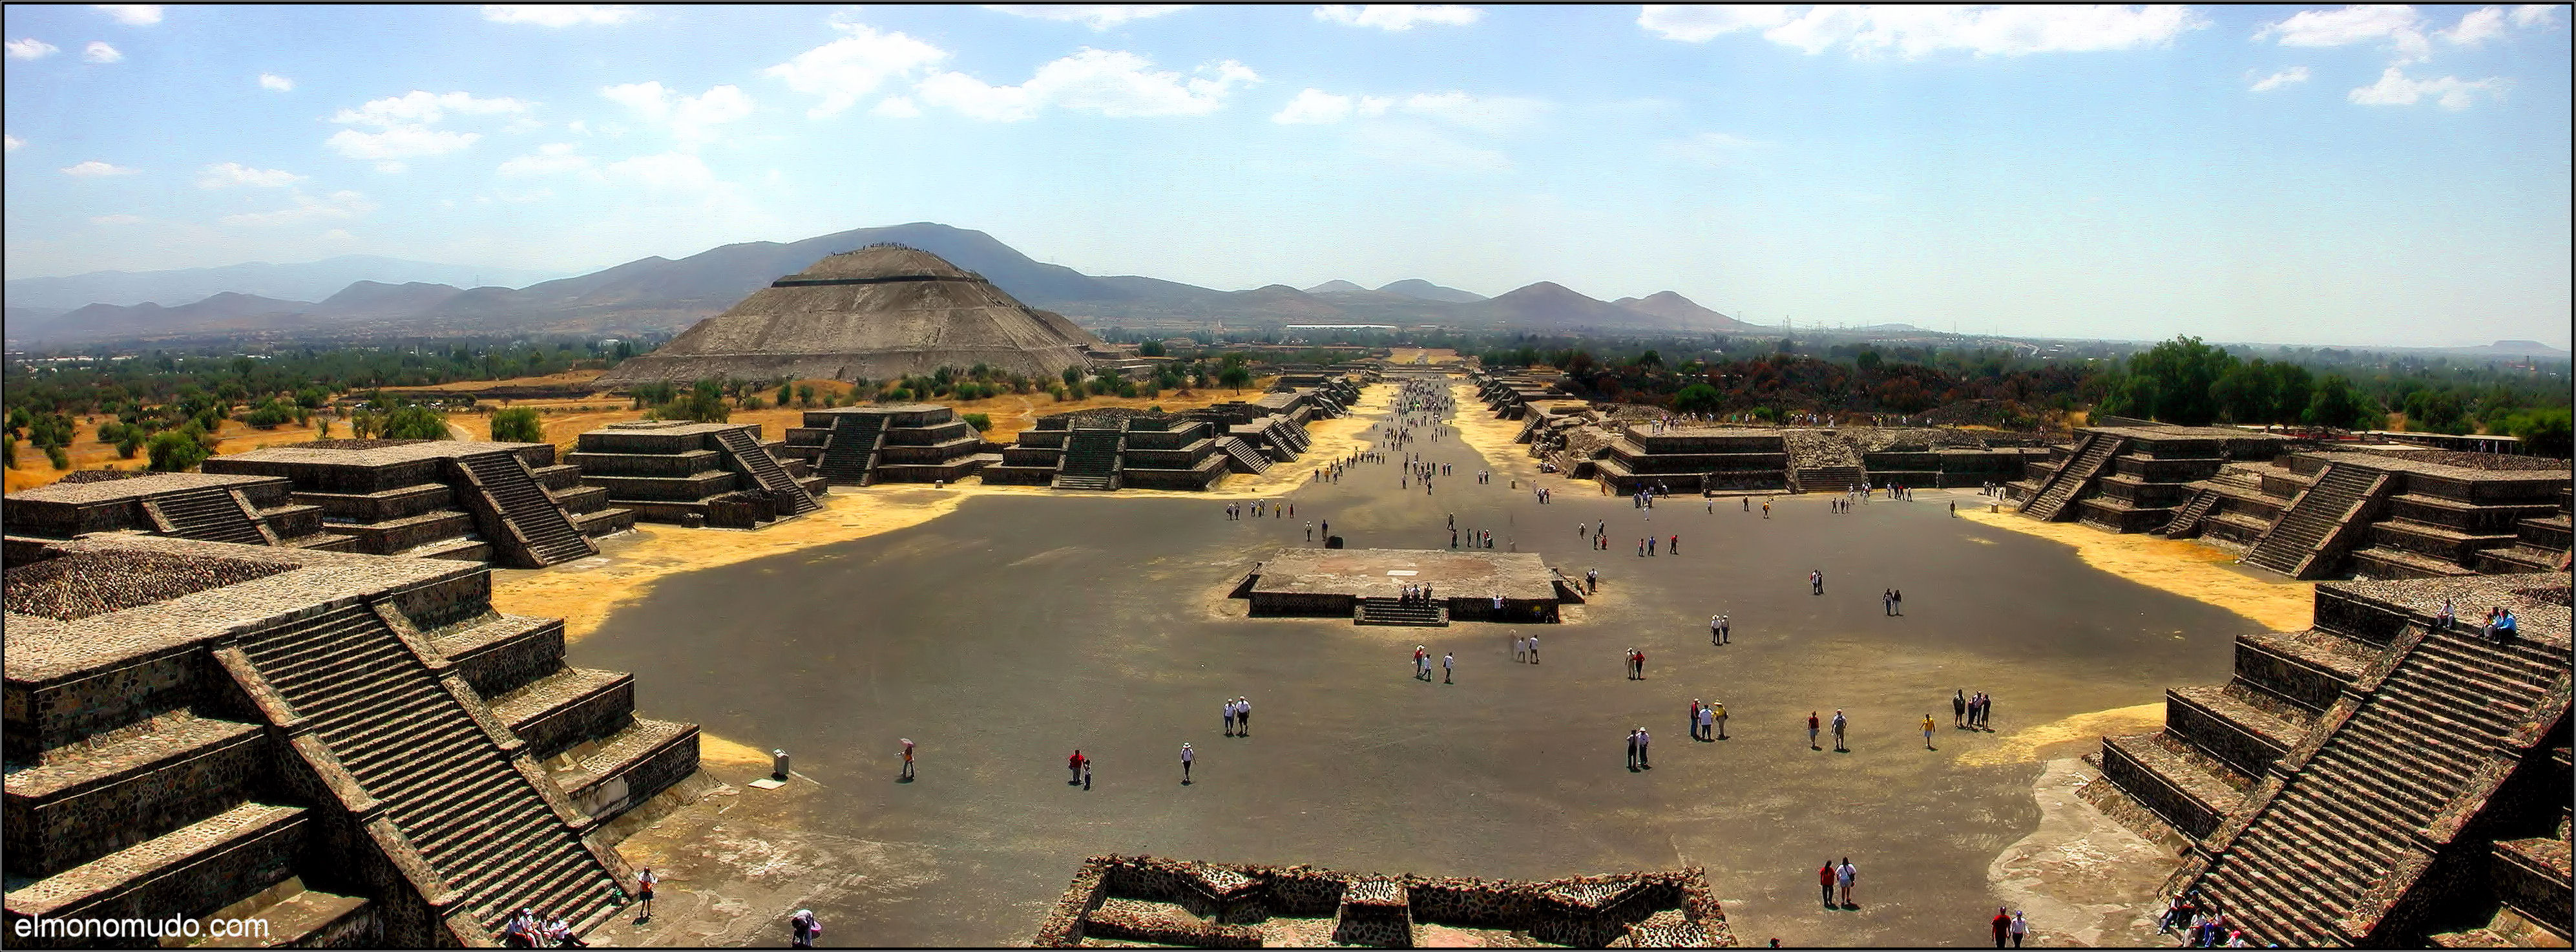 teotihuacan_stich_3987x1473-2